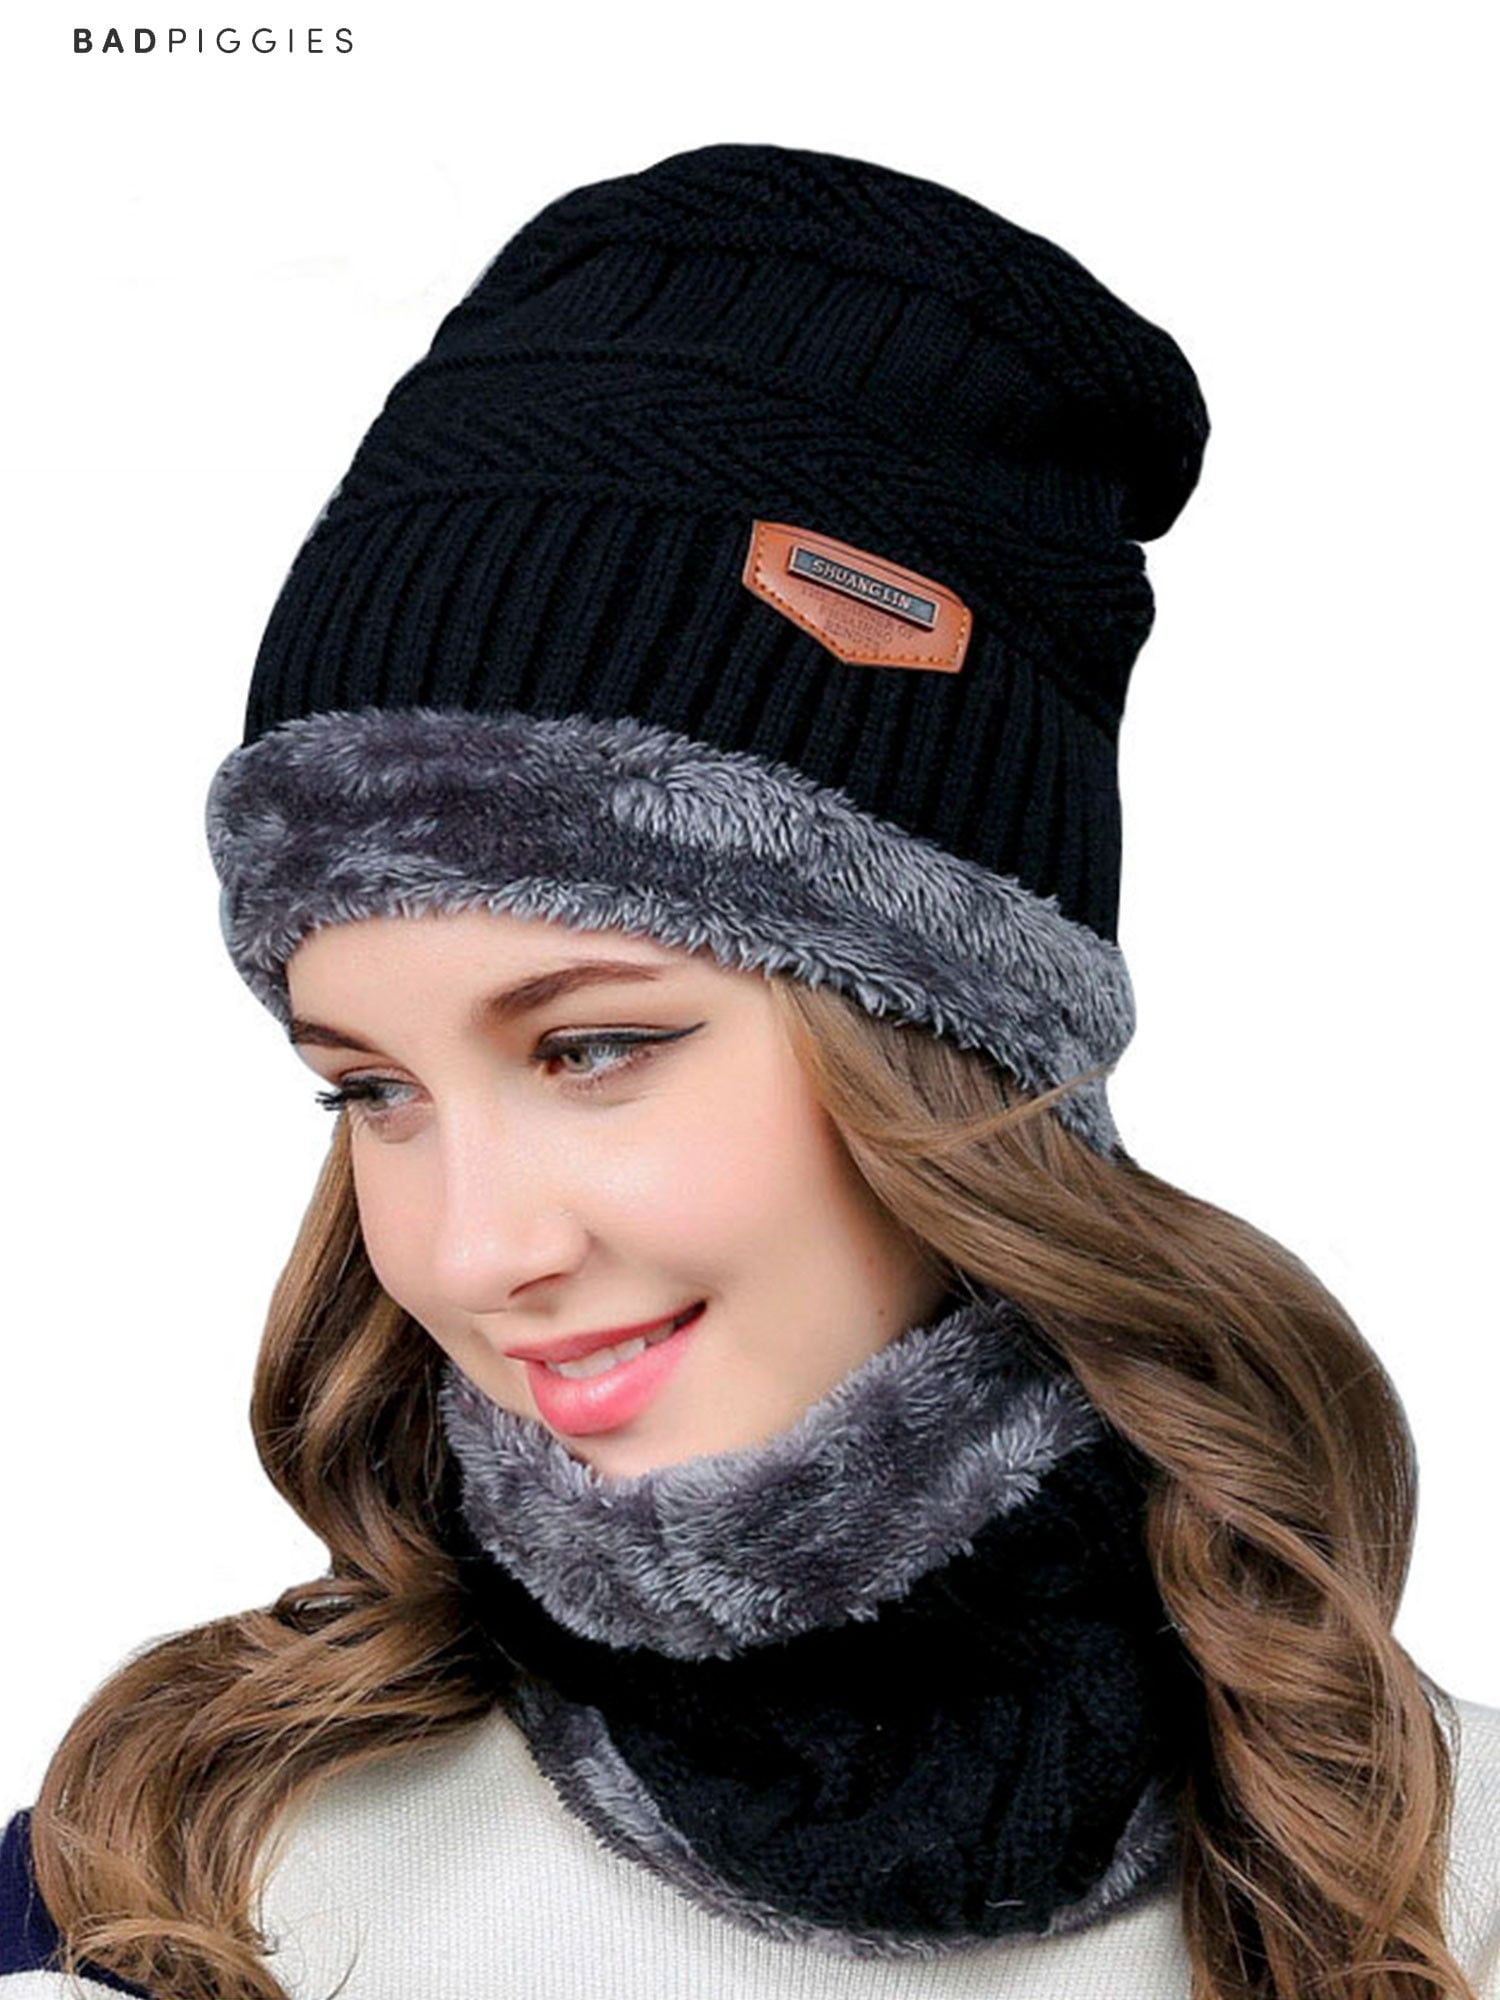 Gray Warm Knitted Hat with Circle Scarf Size: One Size Men/Women Unisex Winter Stretchy Knit Beanie Skull Cap Scarf Set Fleece Inner for Ski Indoors Outdoor Sports 